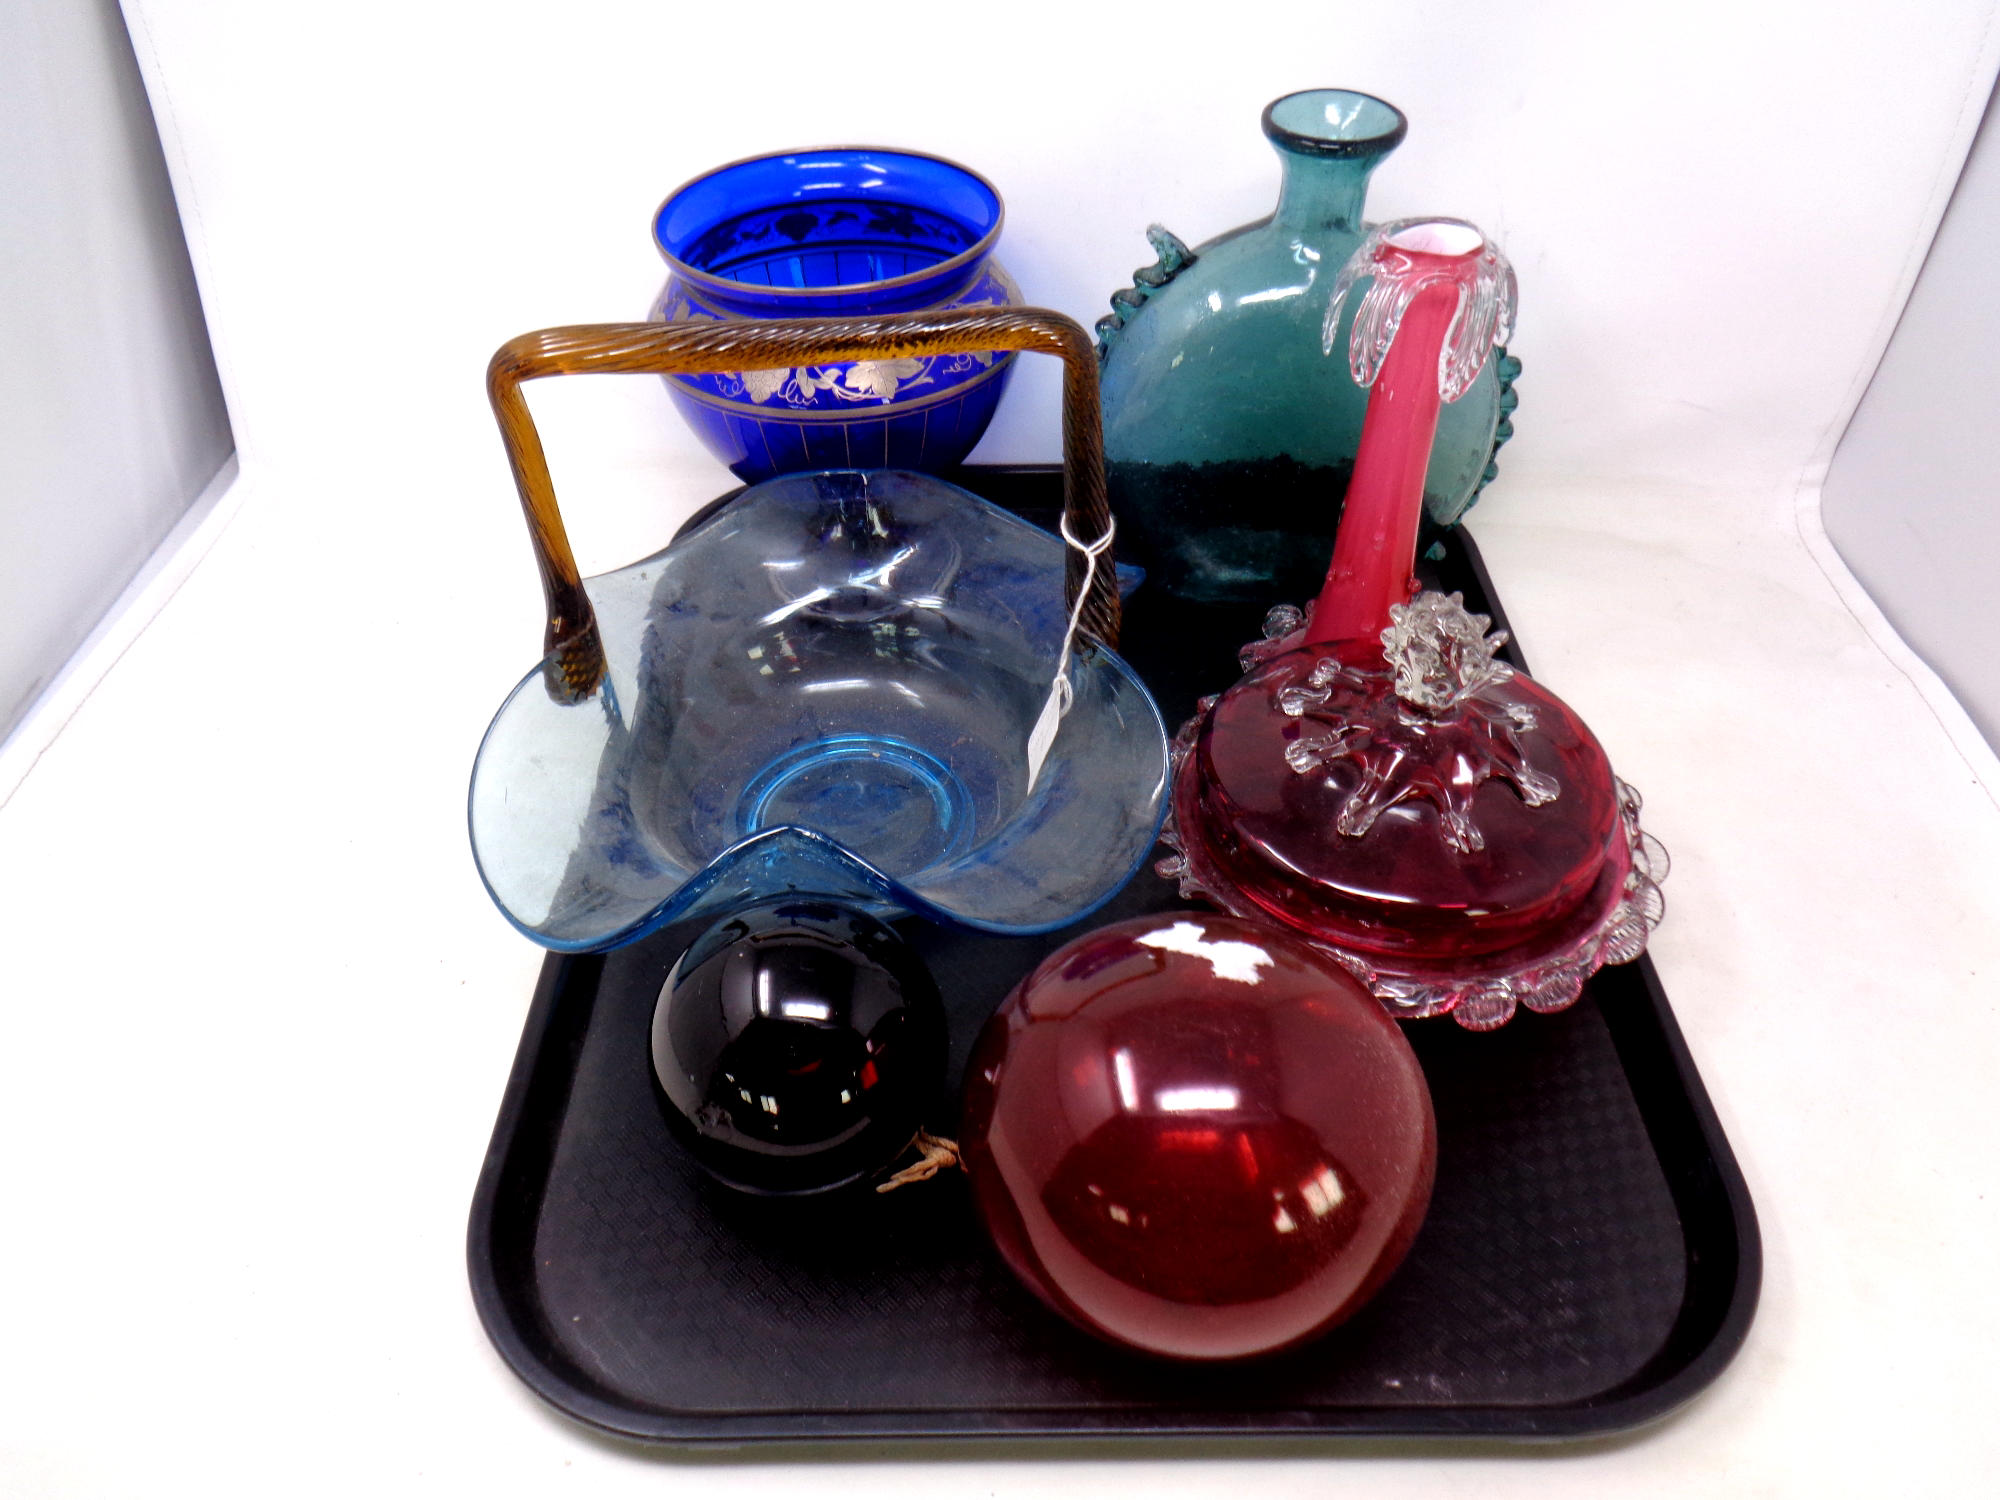 A tray of antique and later glass ware - cranberry glass, lidded dish, glass baubles,